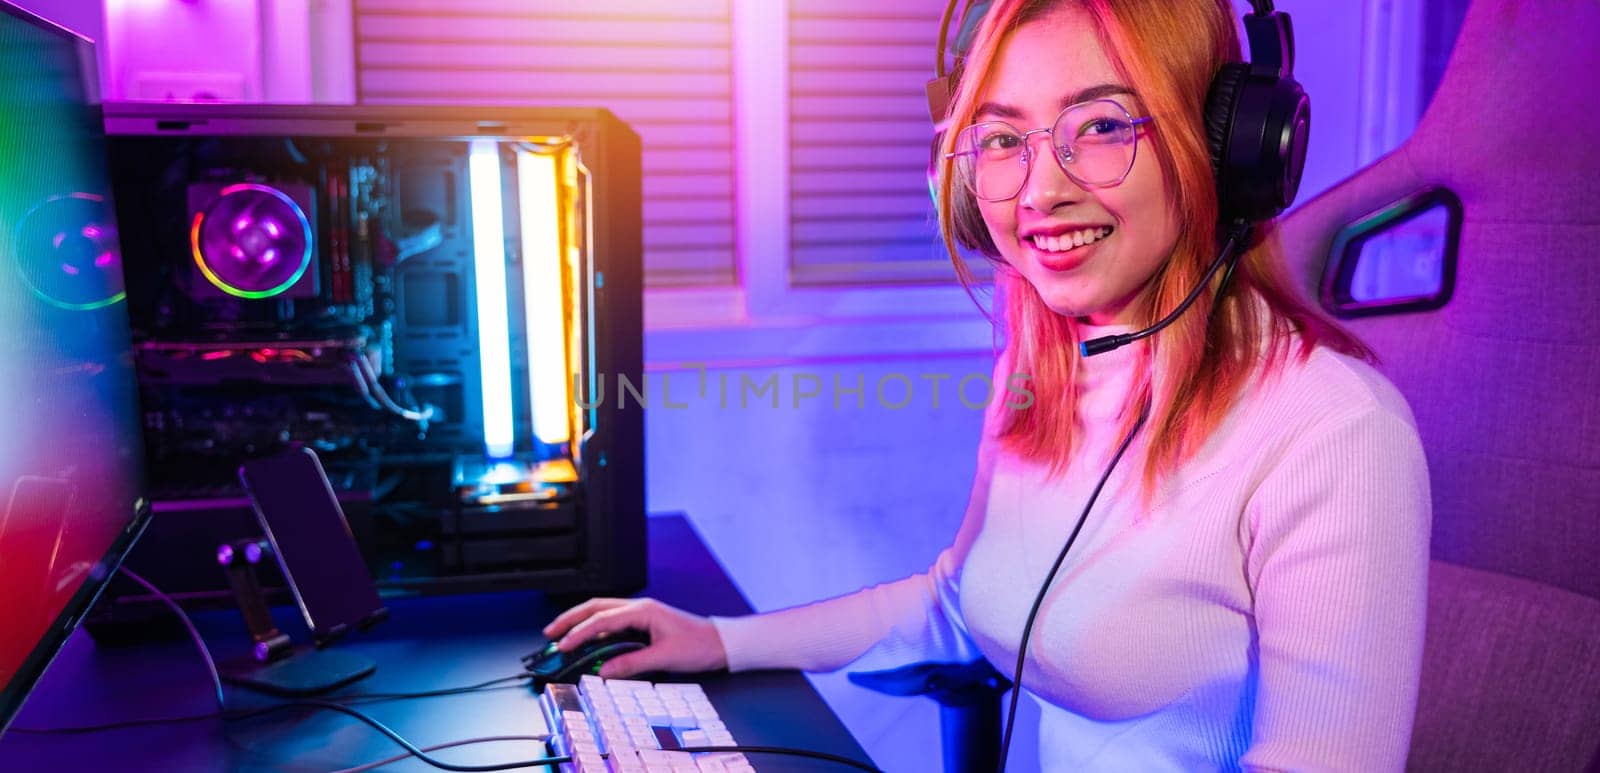 Smiling young woman wearing gaming headphones intend to do playing live stream games online by Sorapop